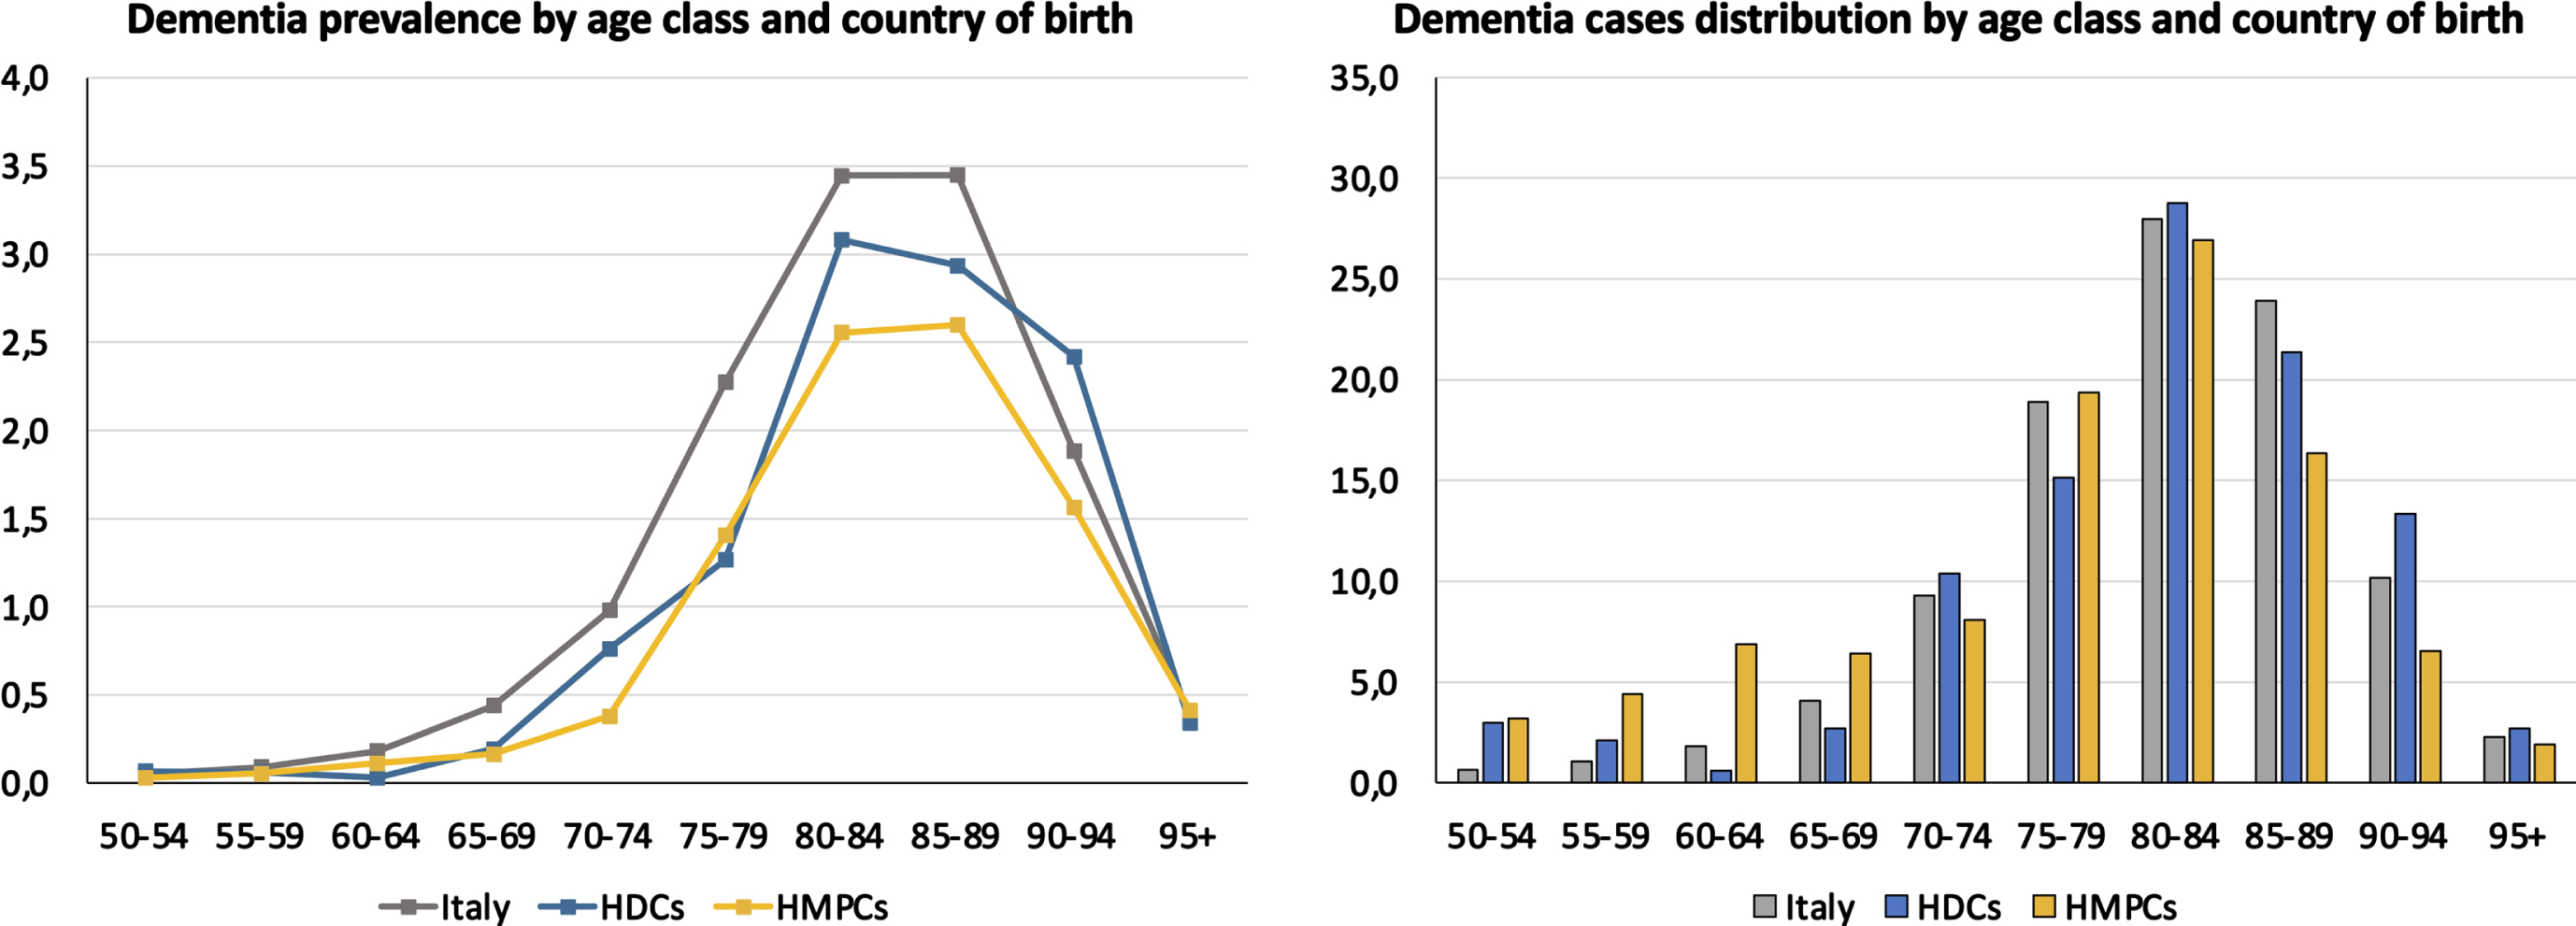 Dementia prevalence (A) and case distribution (B) by age class in among Italians and migrants from highly developed countries (HDCs) and high migratory pressure countries (HMPCs).